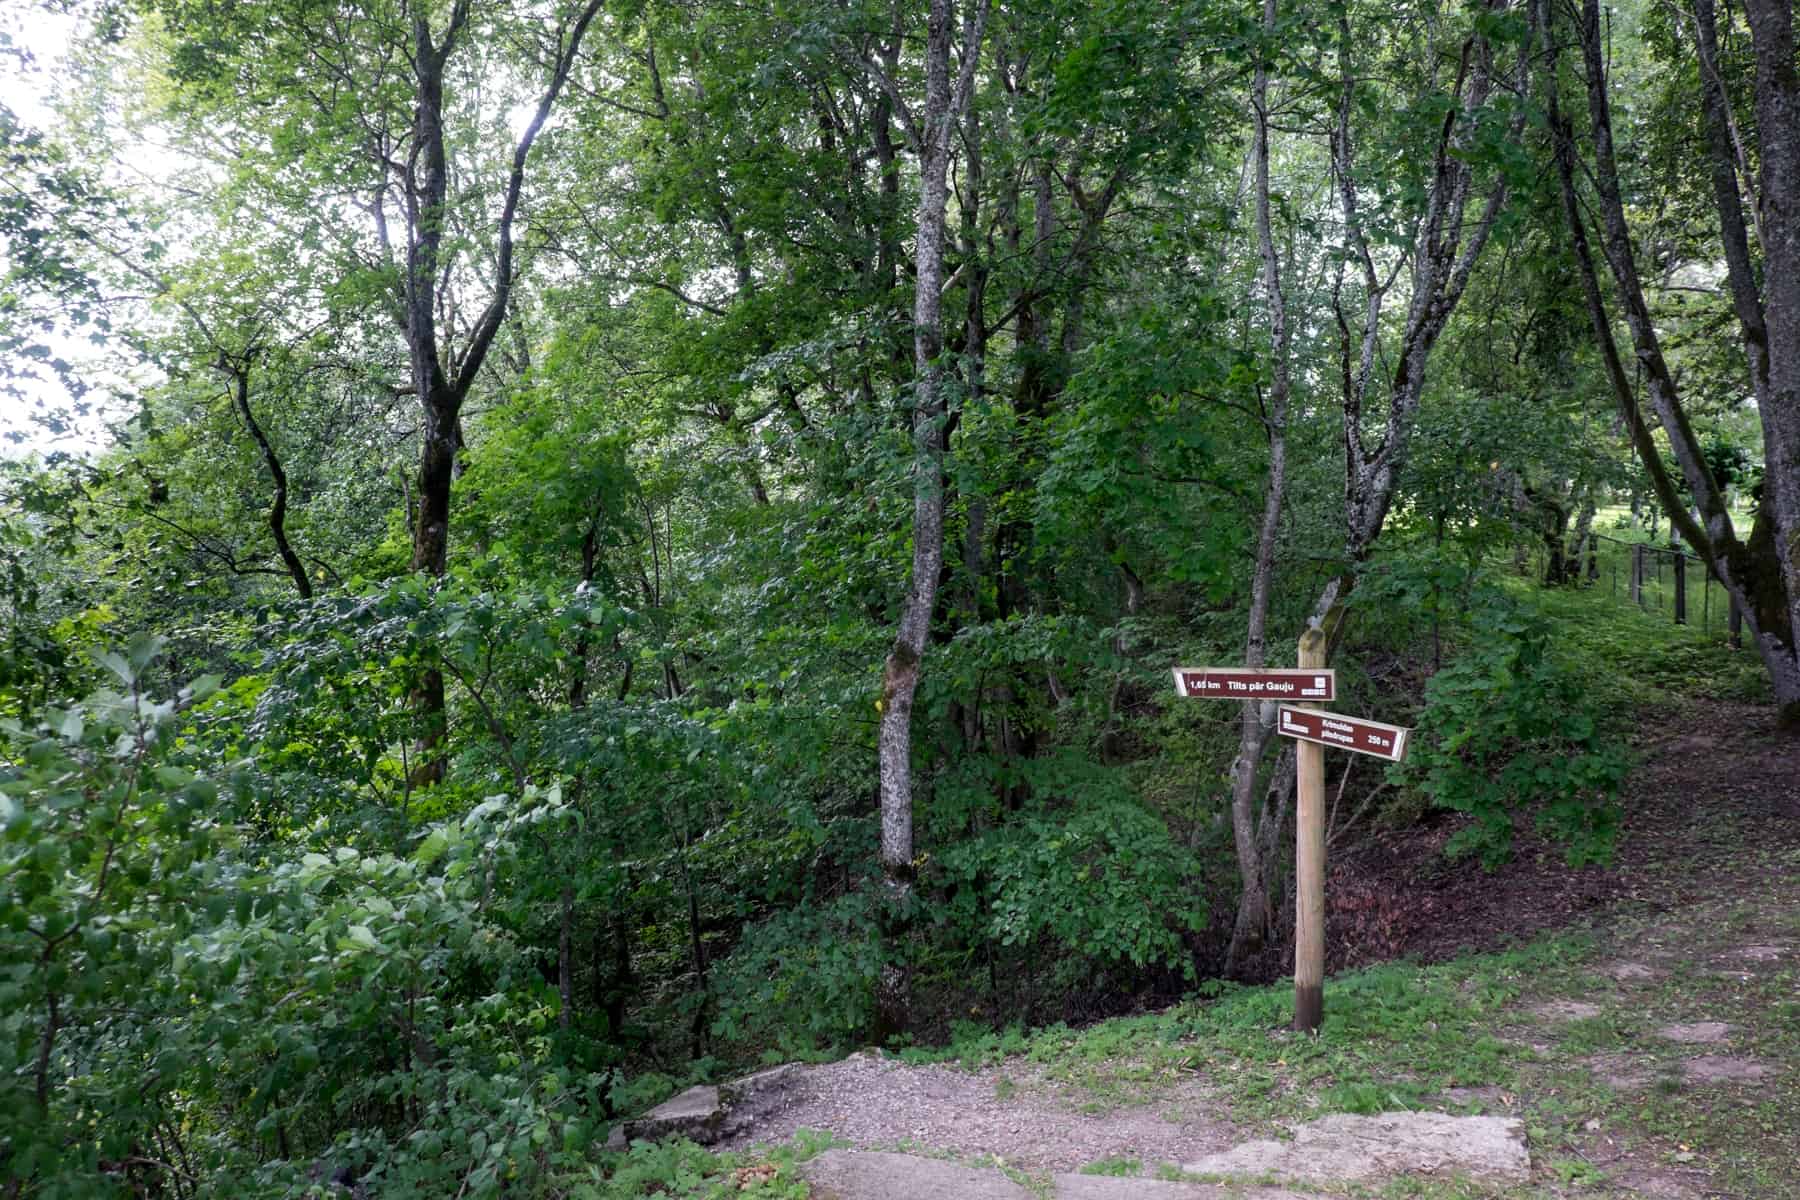 A wooden pole with two brown signs mark hiking trails in the green forest landscape of Sigulda, Latvia